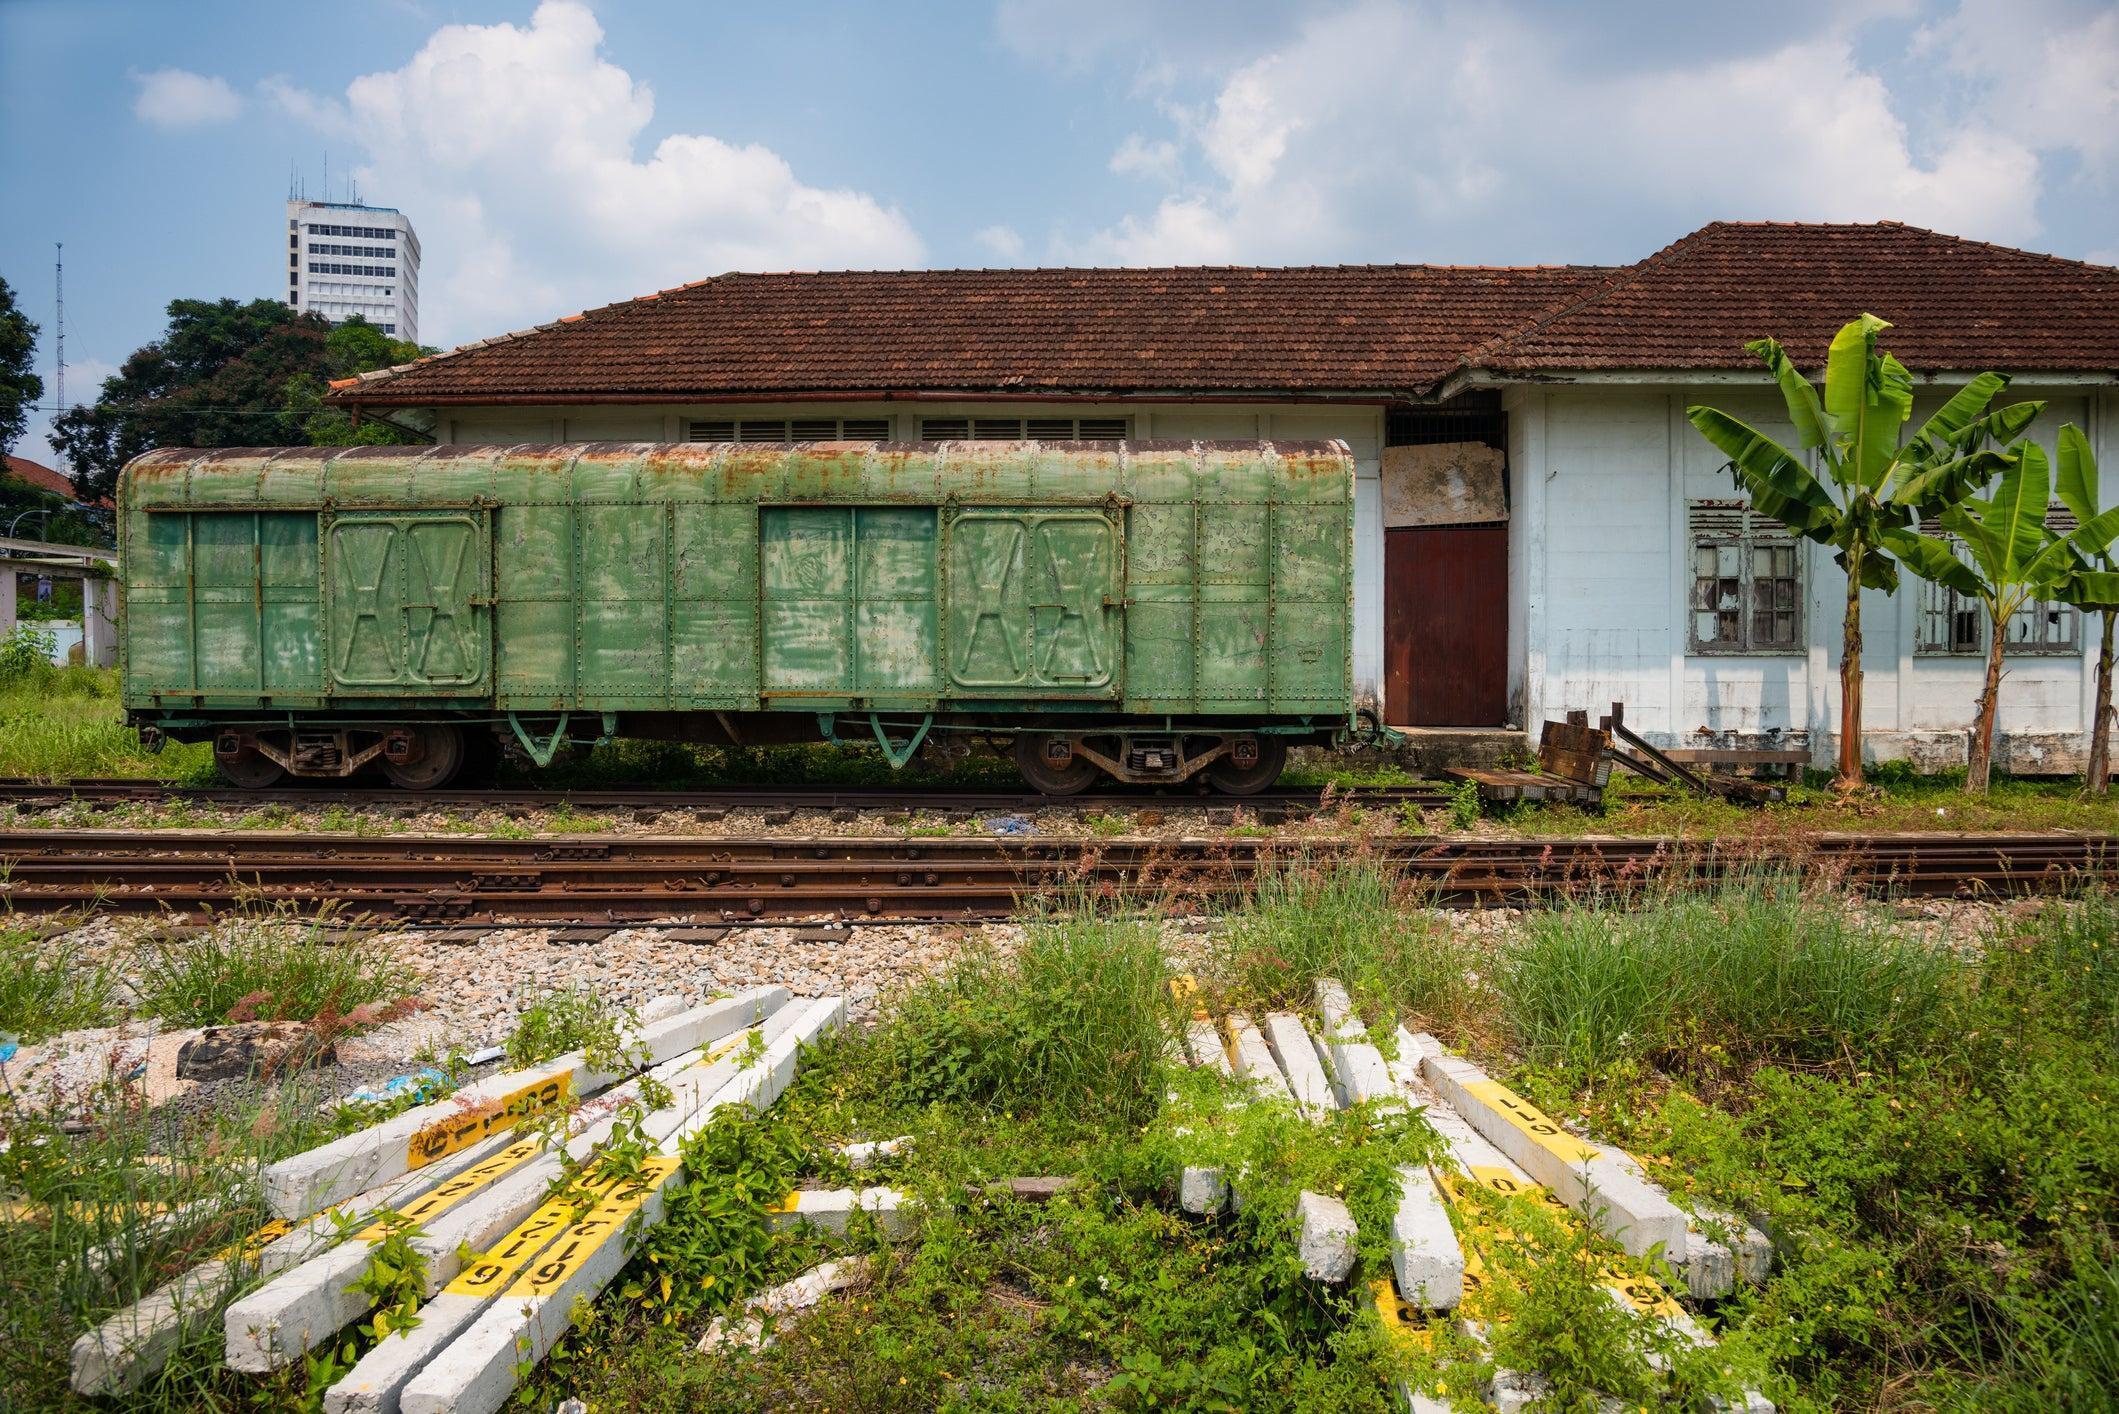 Distressed boxcar at Segamat station - Stephane_Jaquemet/iStock/Getty Images